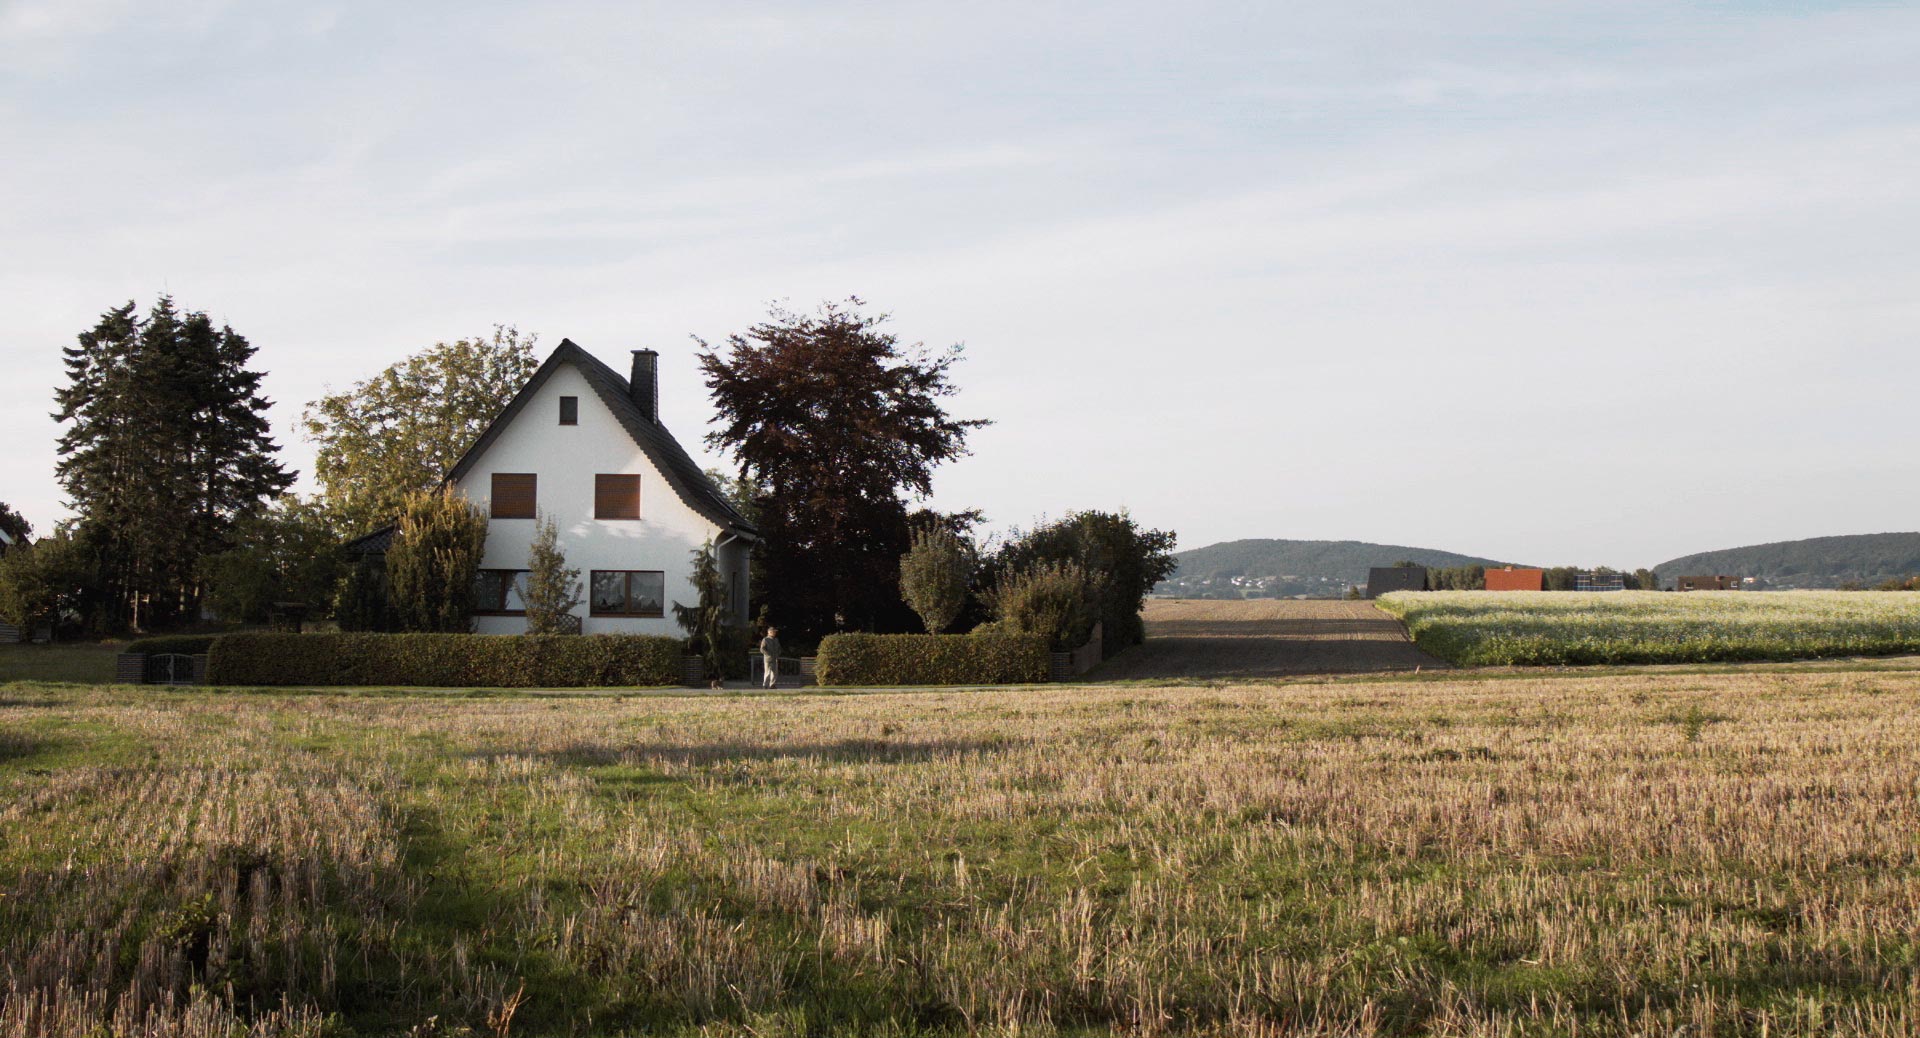 Weihes house before the motorway – beautiful landscape